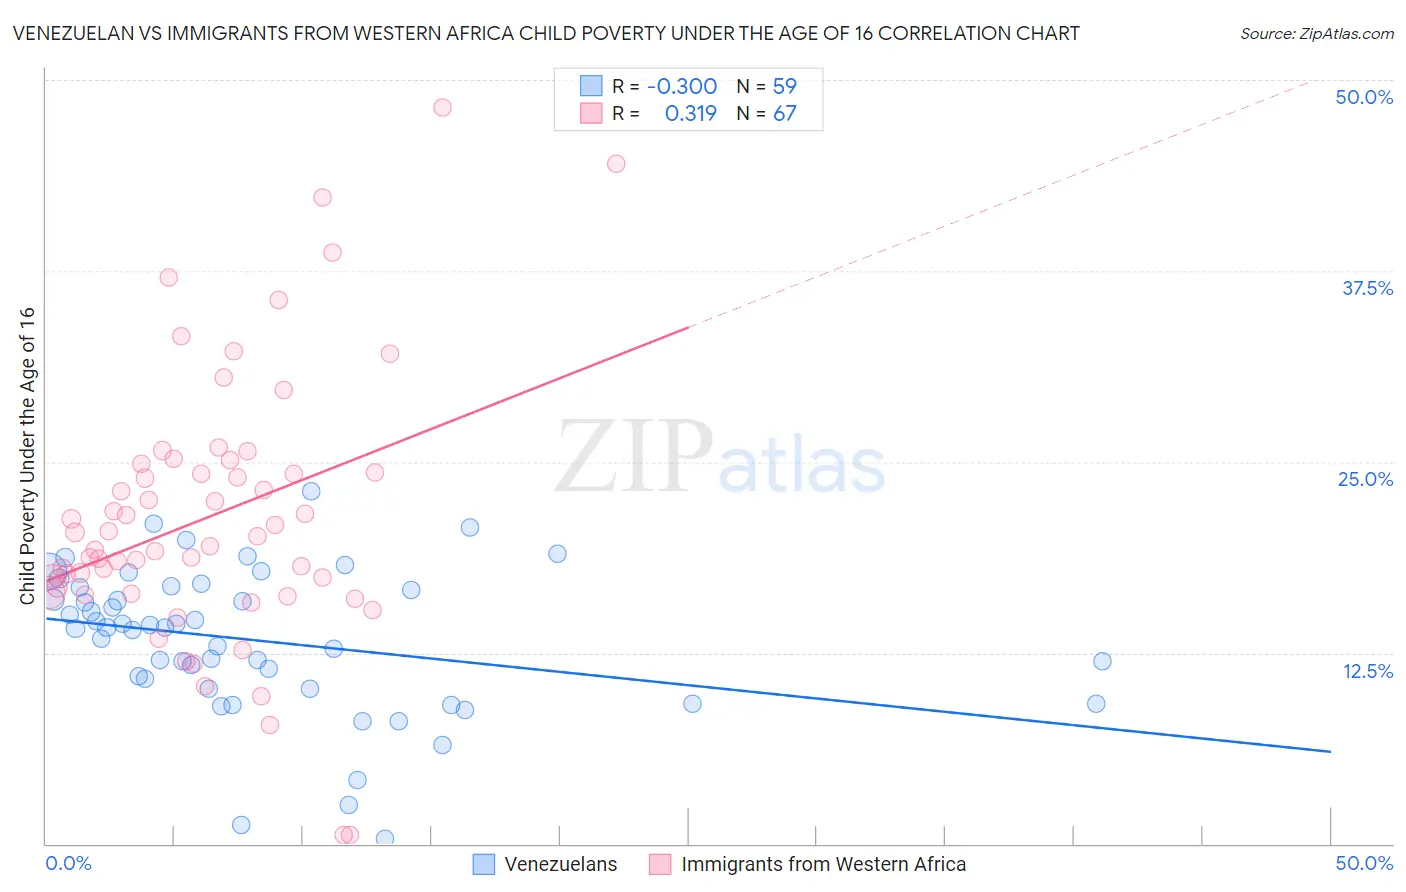 Venezuelan vs Immigrants from Western Africa Child Poverty Under the Age of 16